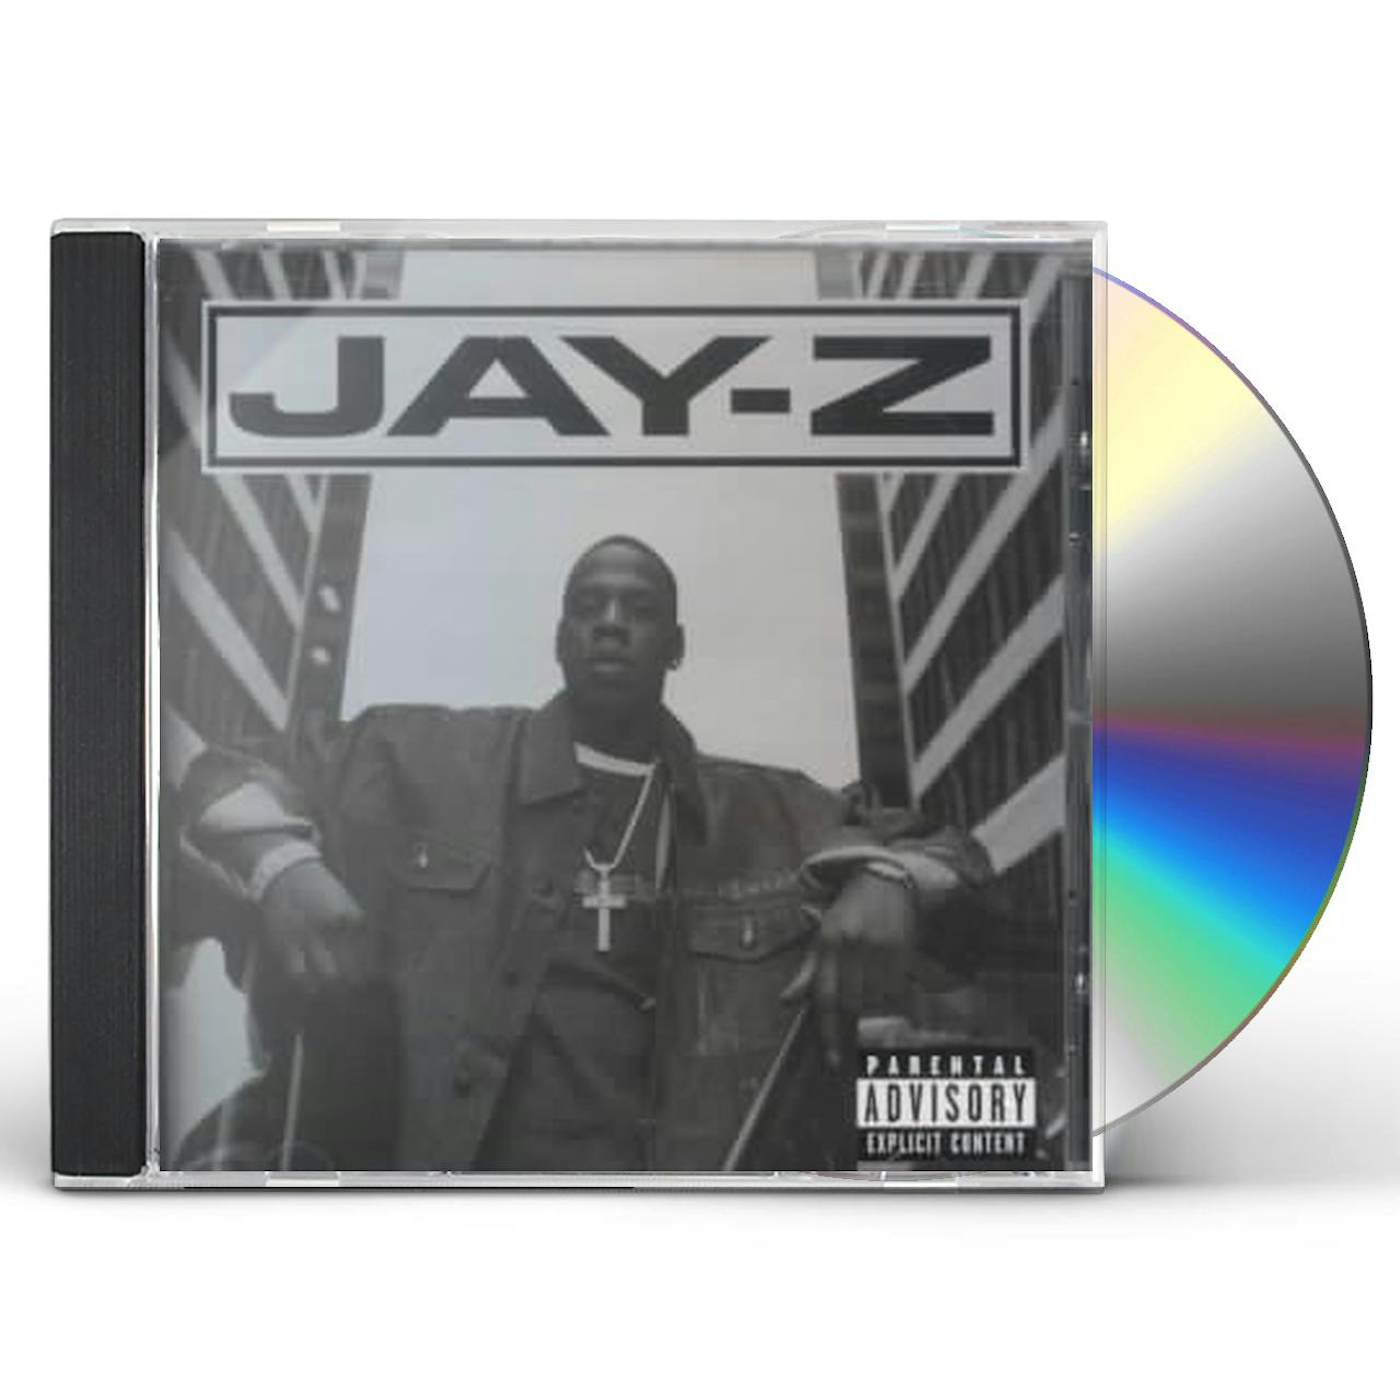 JAY-Z VOLUME 3: THE LIFE & TIMES OF S CARTER CD